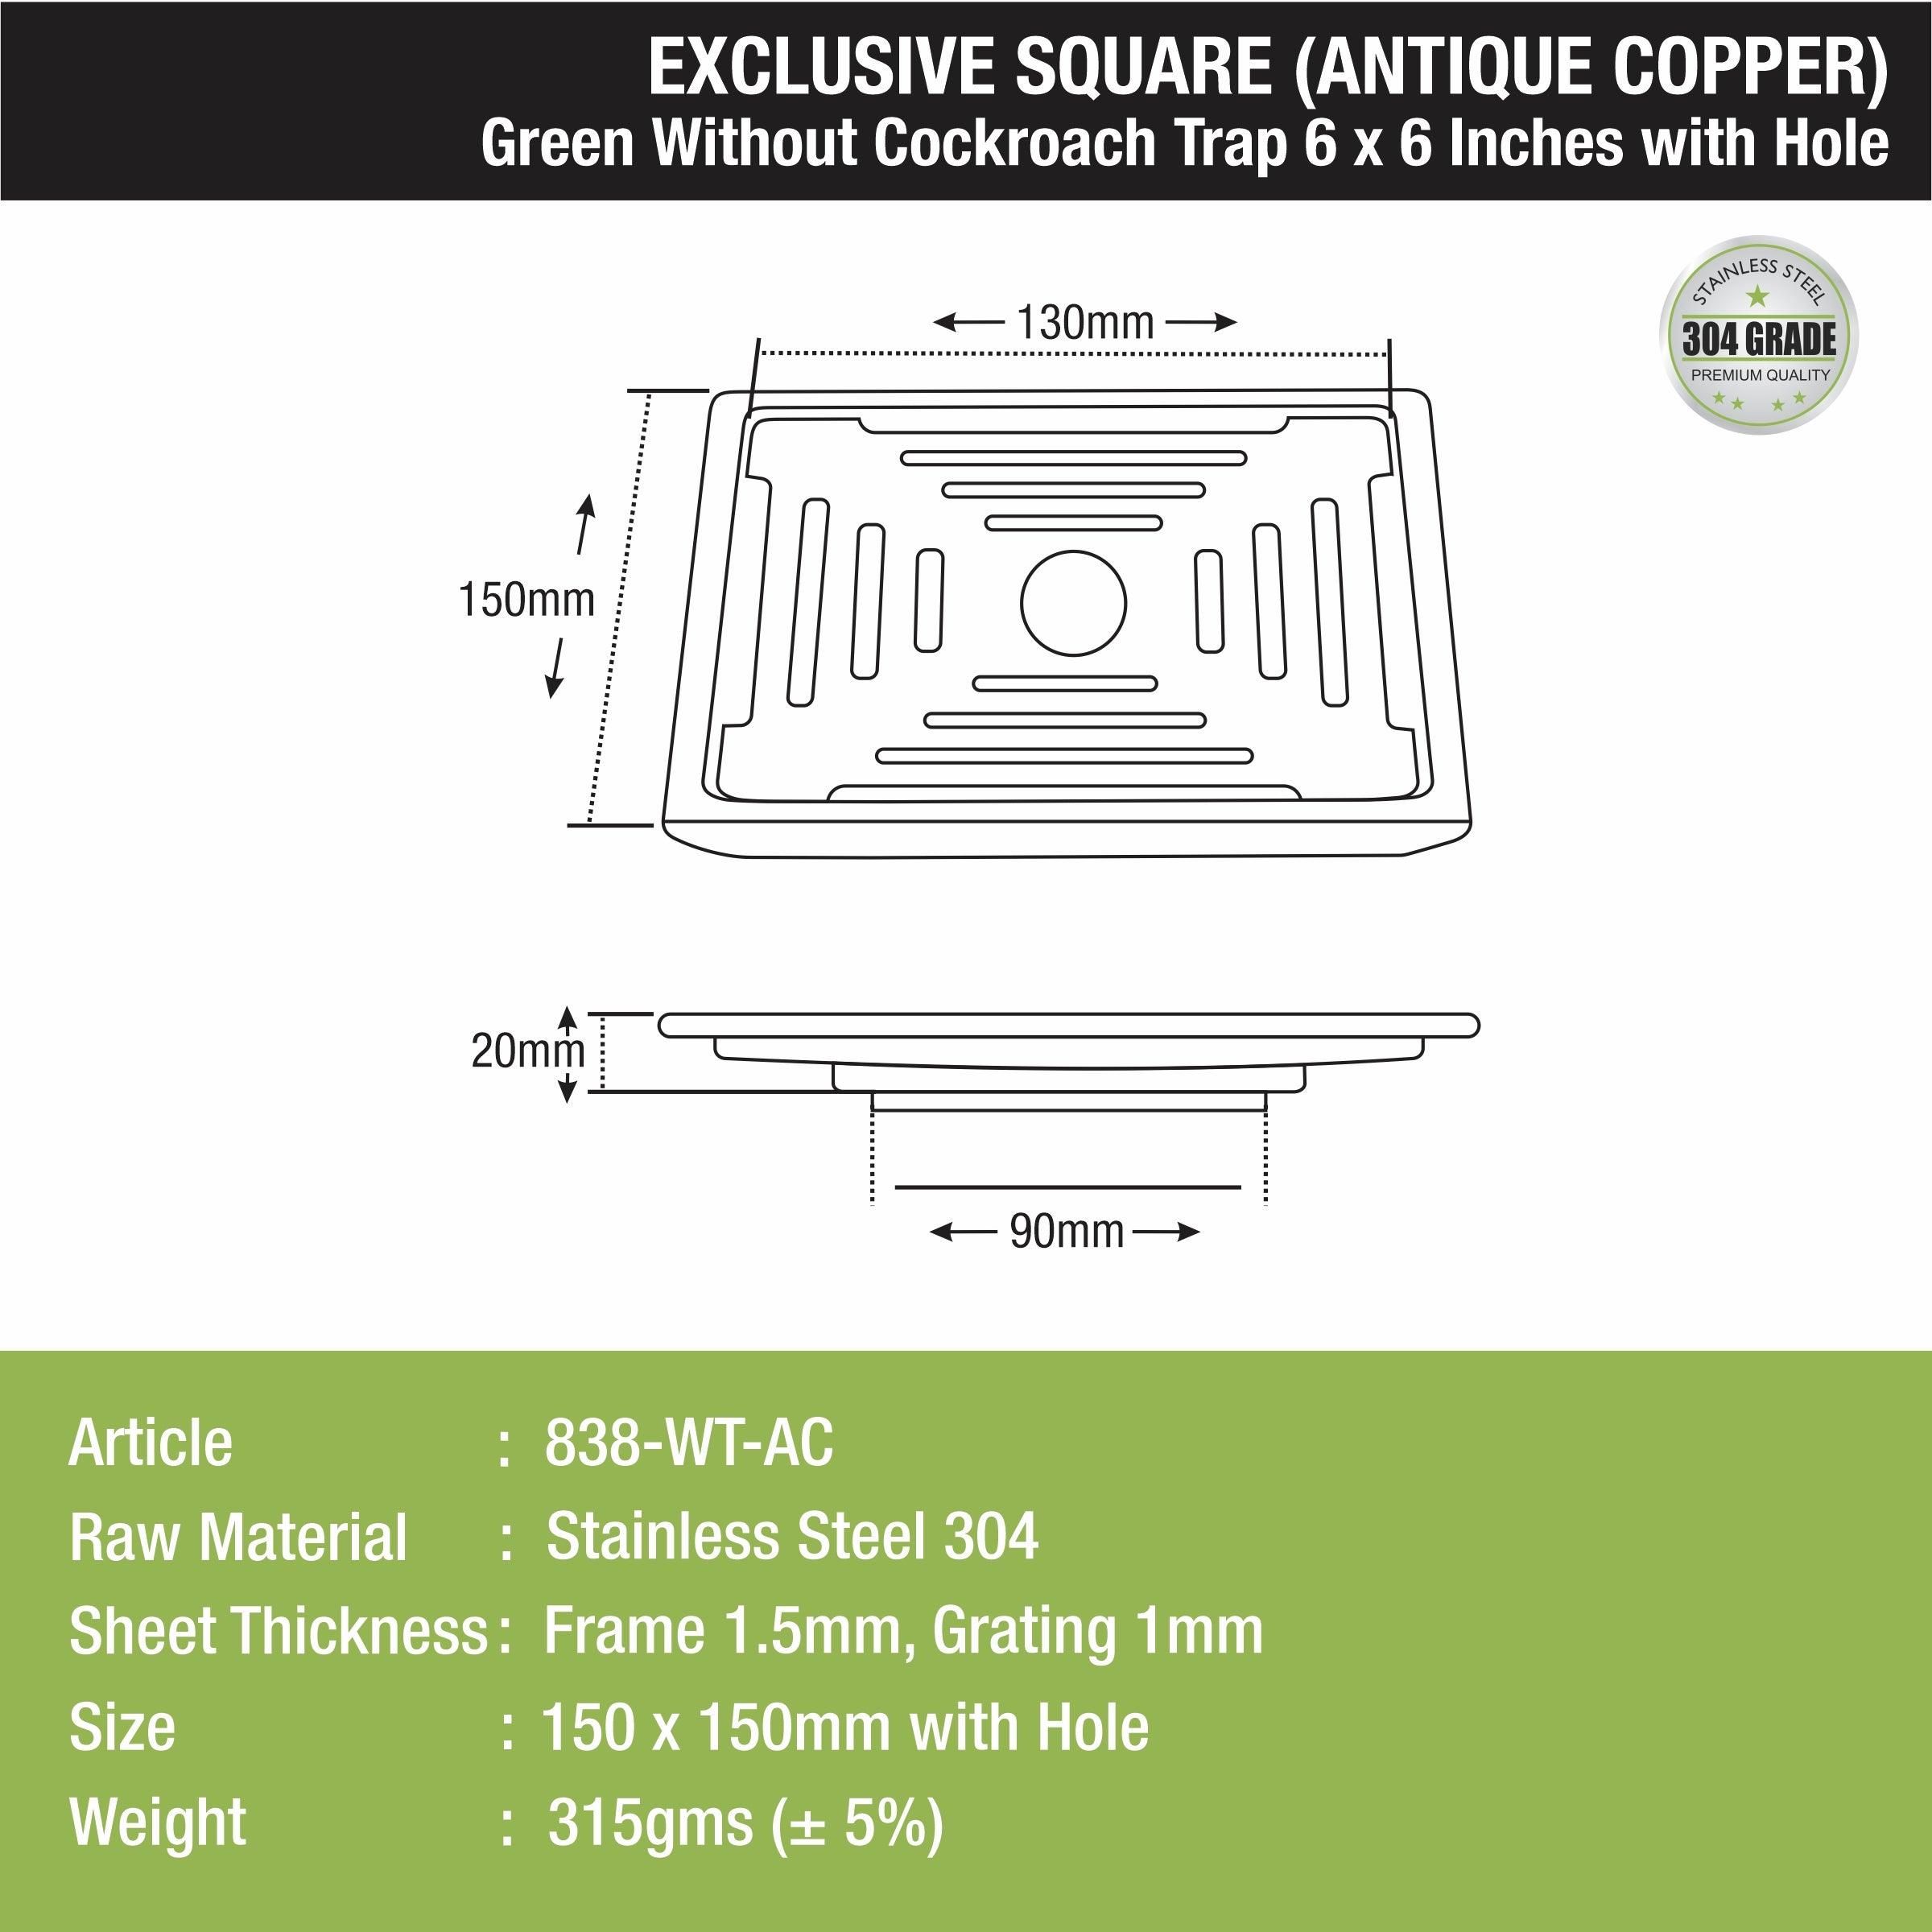 Green Exclusive Square Floor Drain in Antique Copper PVD Coating (6 x 6 Inches) with Hole sizes and dimensions